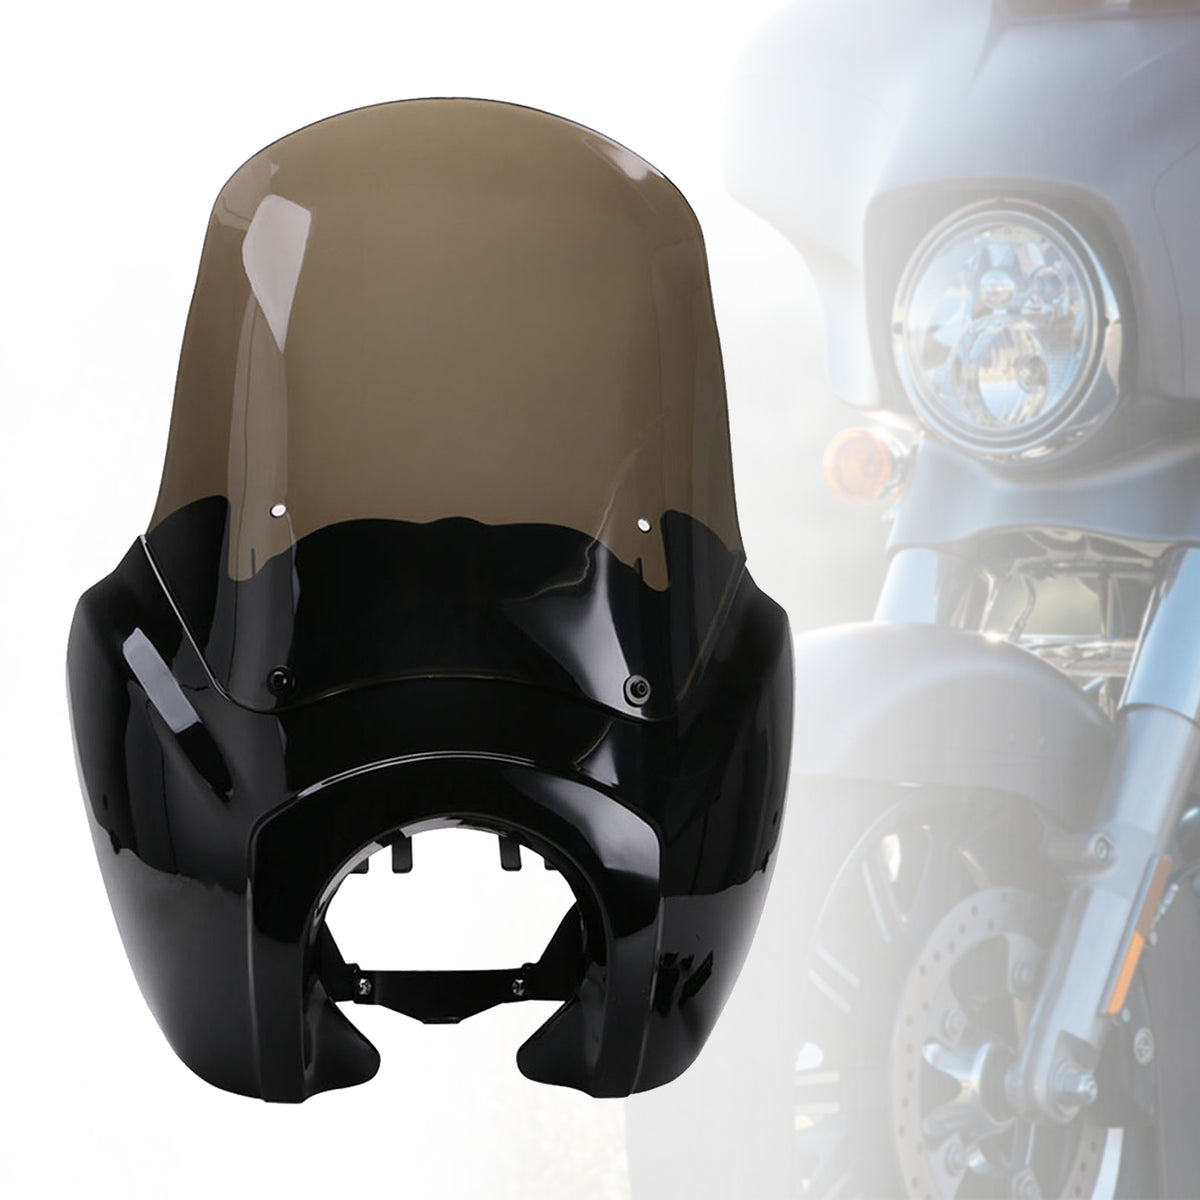 Windshield Headlight Fairing Cover fit for Dyna 2006-17 FXDXT T-Sport 2000-2003